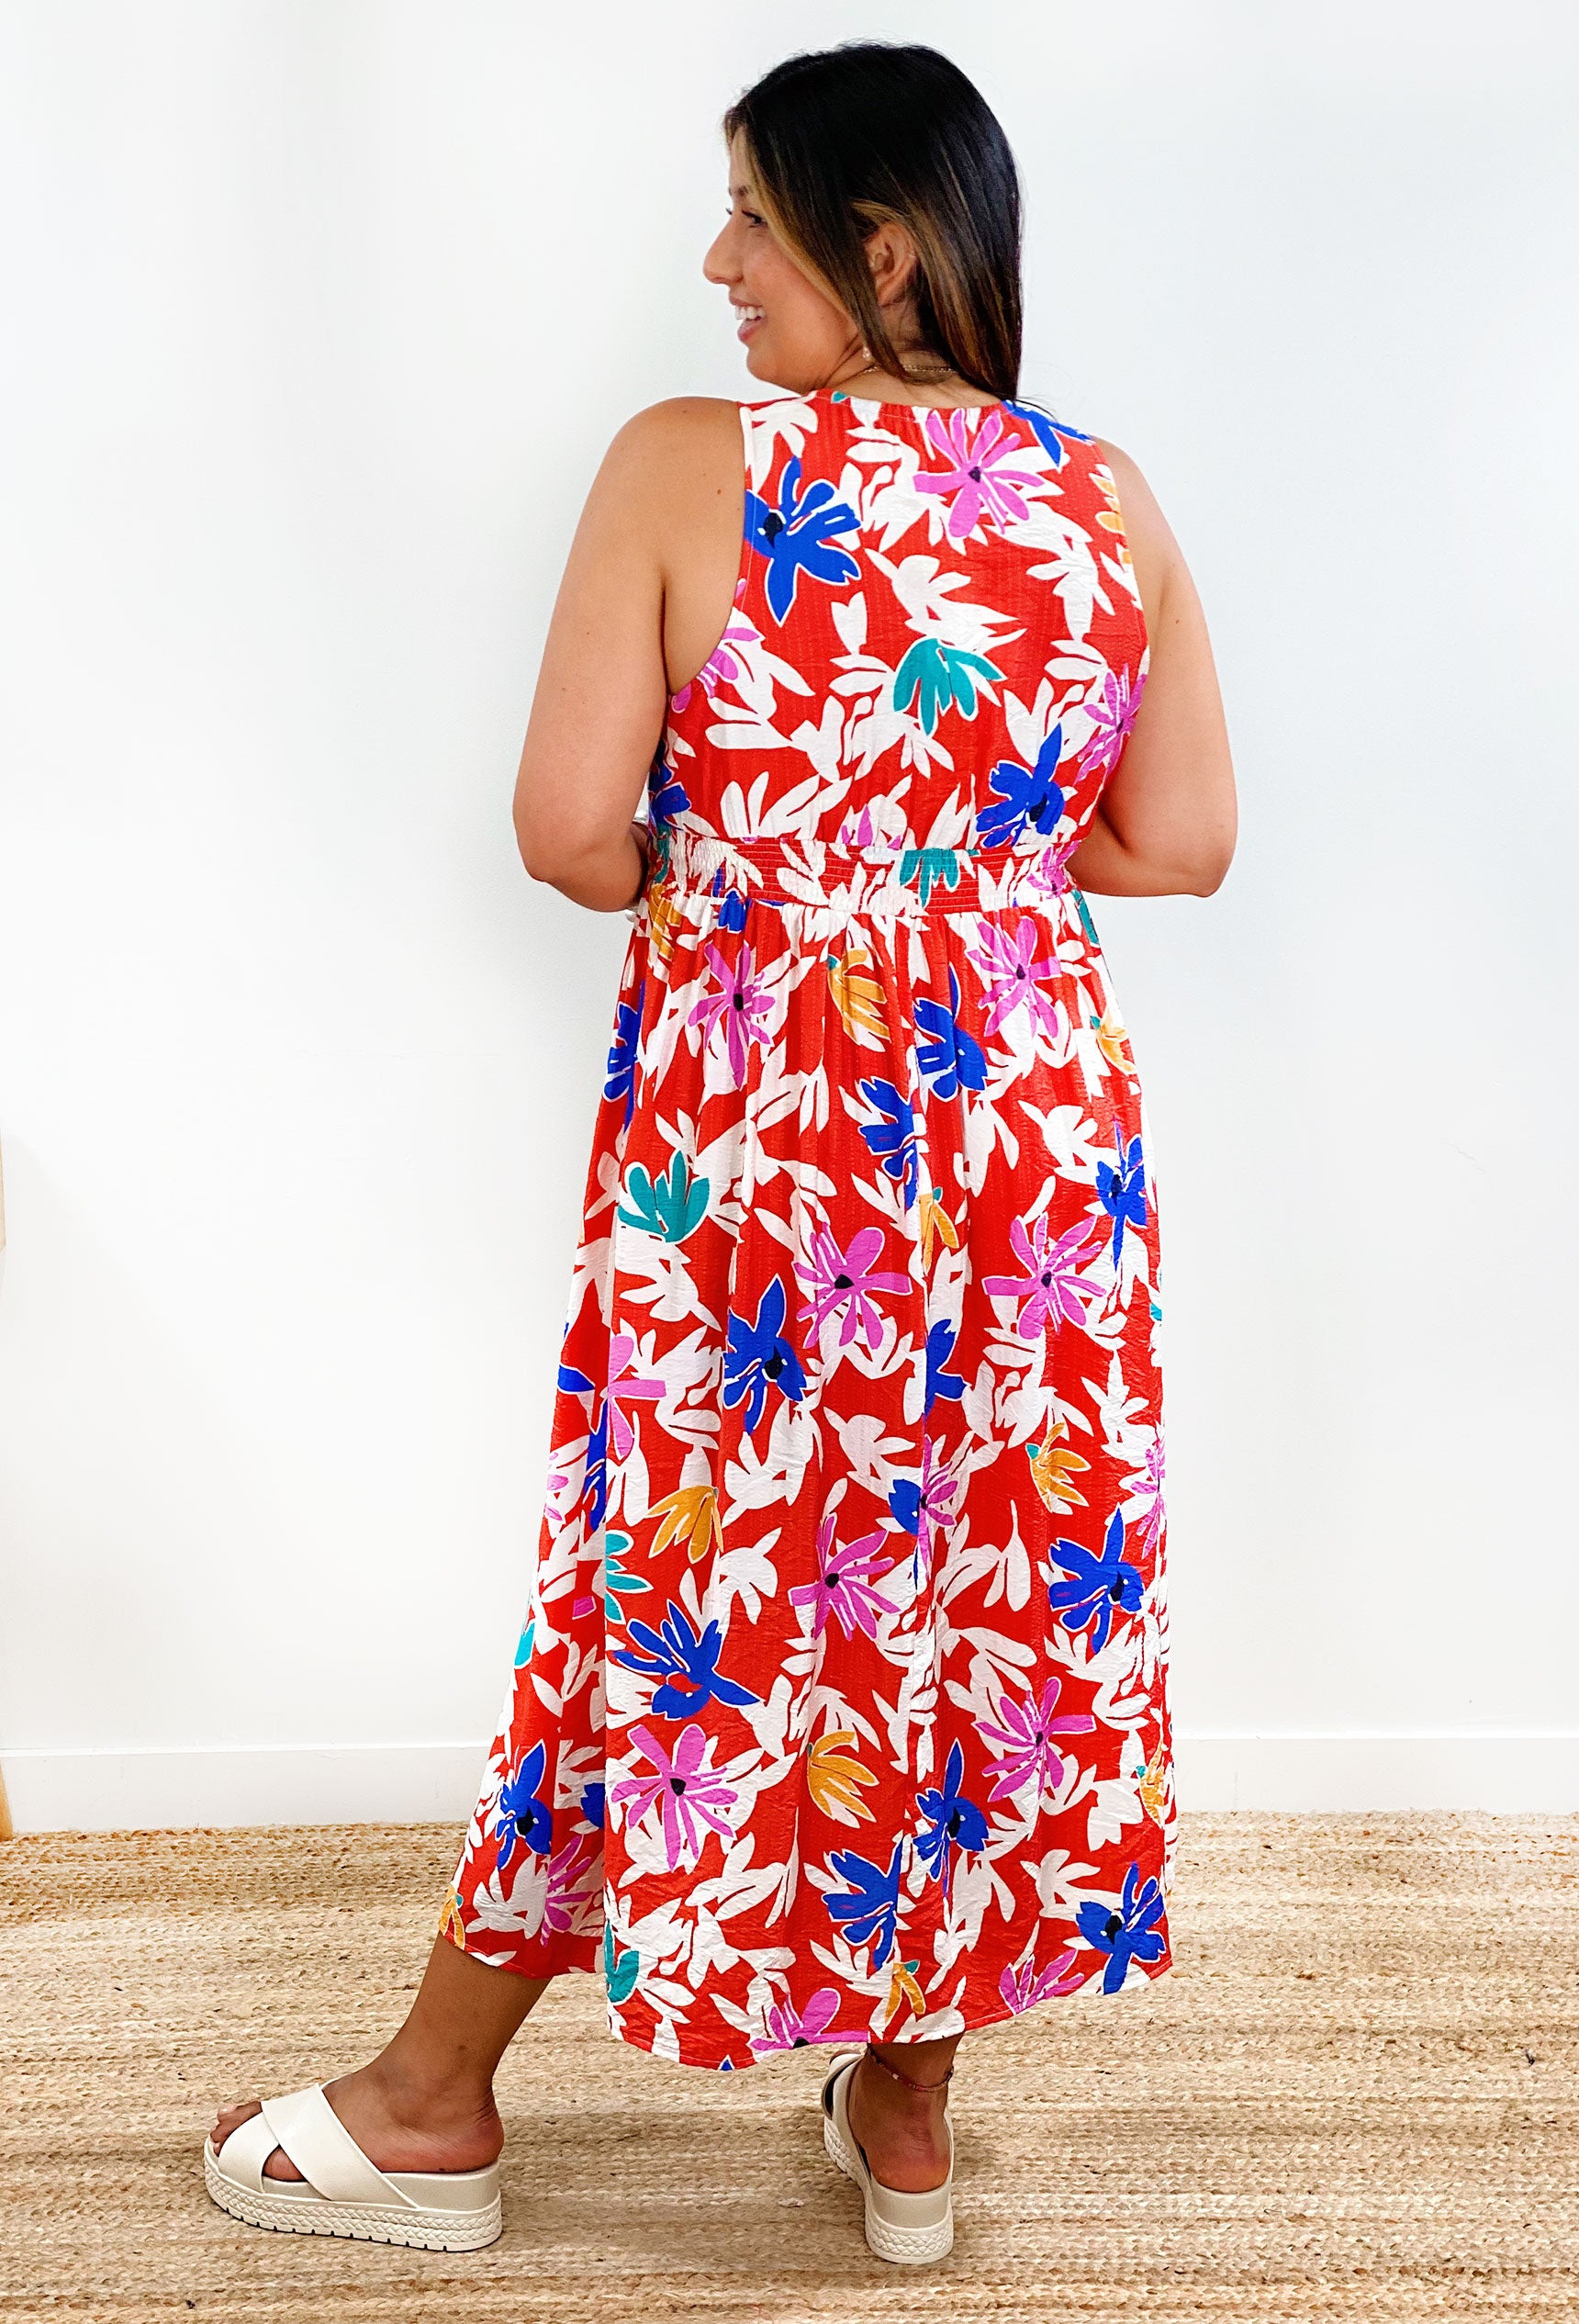 Island bloom midi dress. Red dress featuring a floral print with pops of color and a v-neck line.